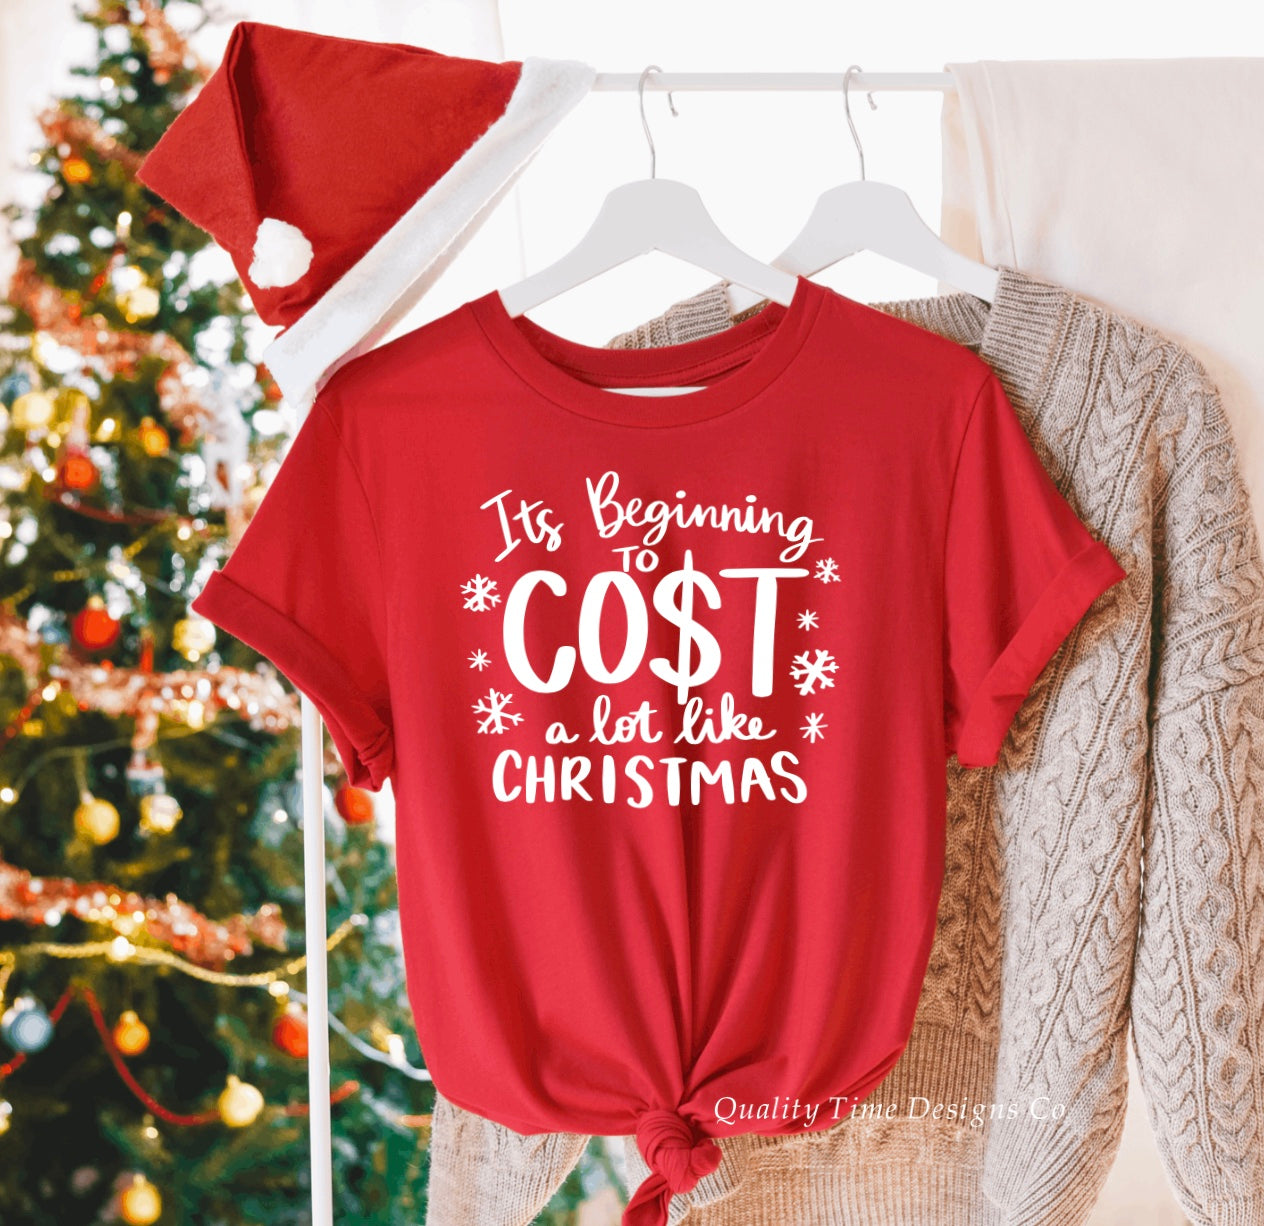 It’s beginning to cost a lot like Christmas t-shirt 